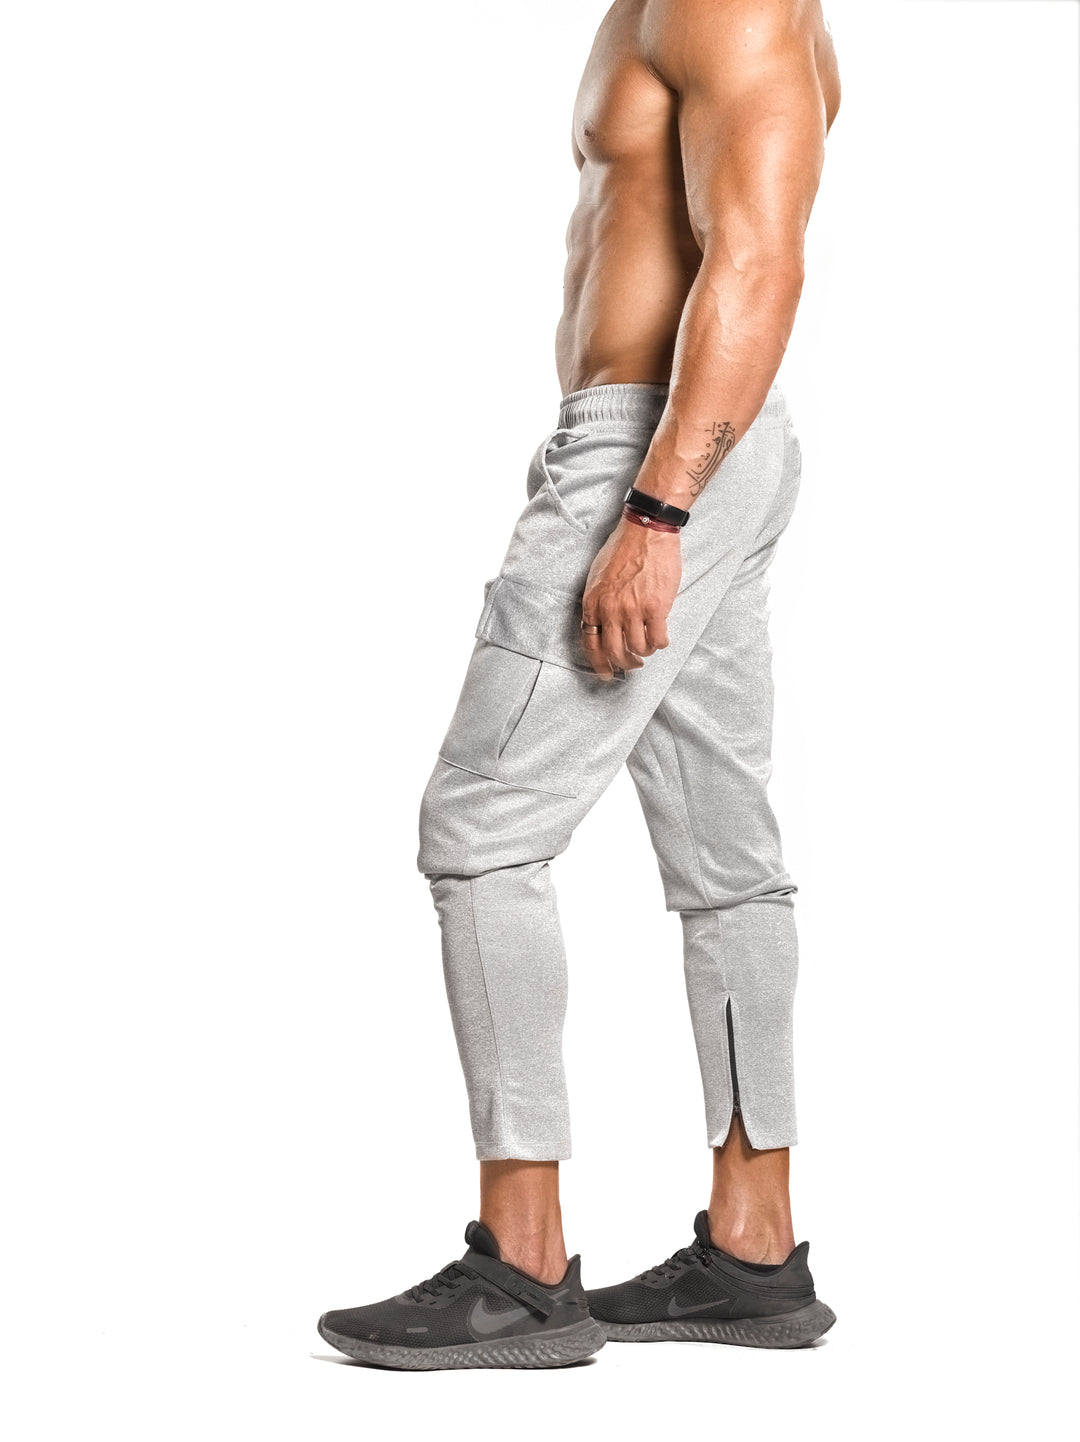 Tapered Cargo Zip Joggers - ULTRA Perform-Gear [Light Heather Grey] Limited Quantity - Sweatpants/Joggers - Gym Apparel Egypt